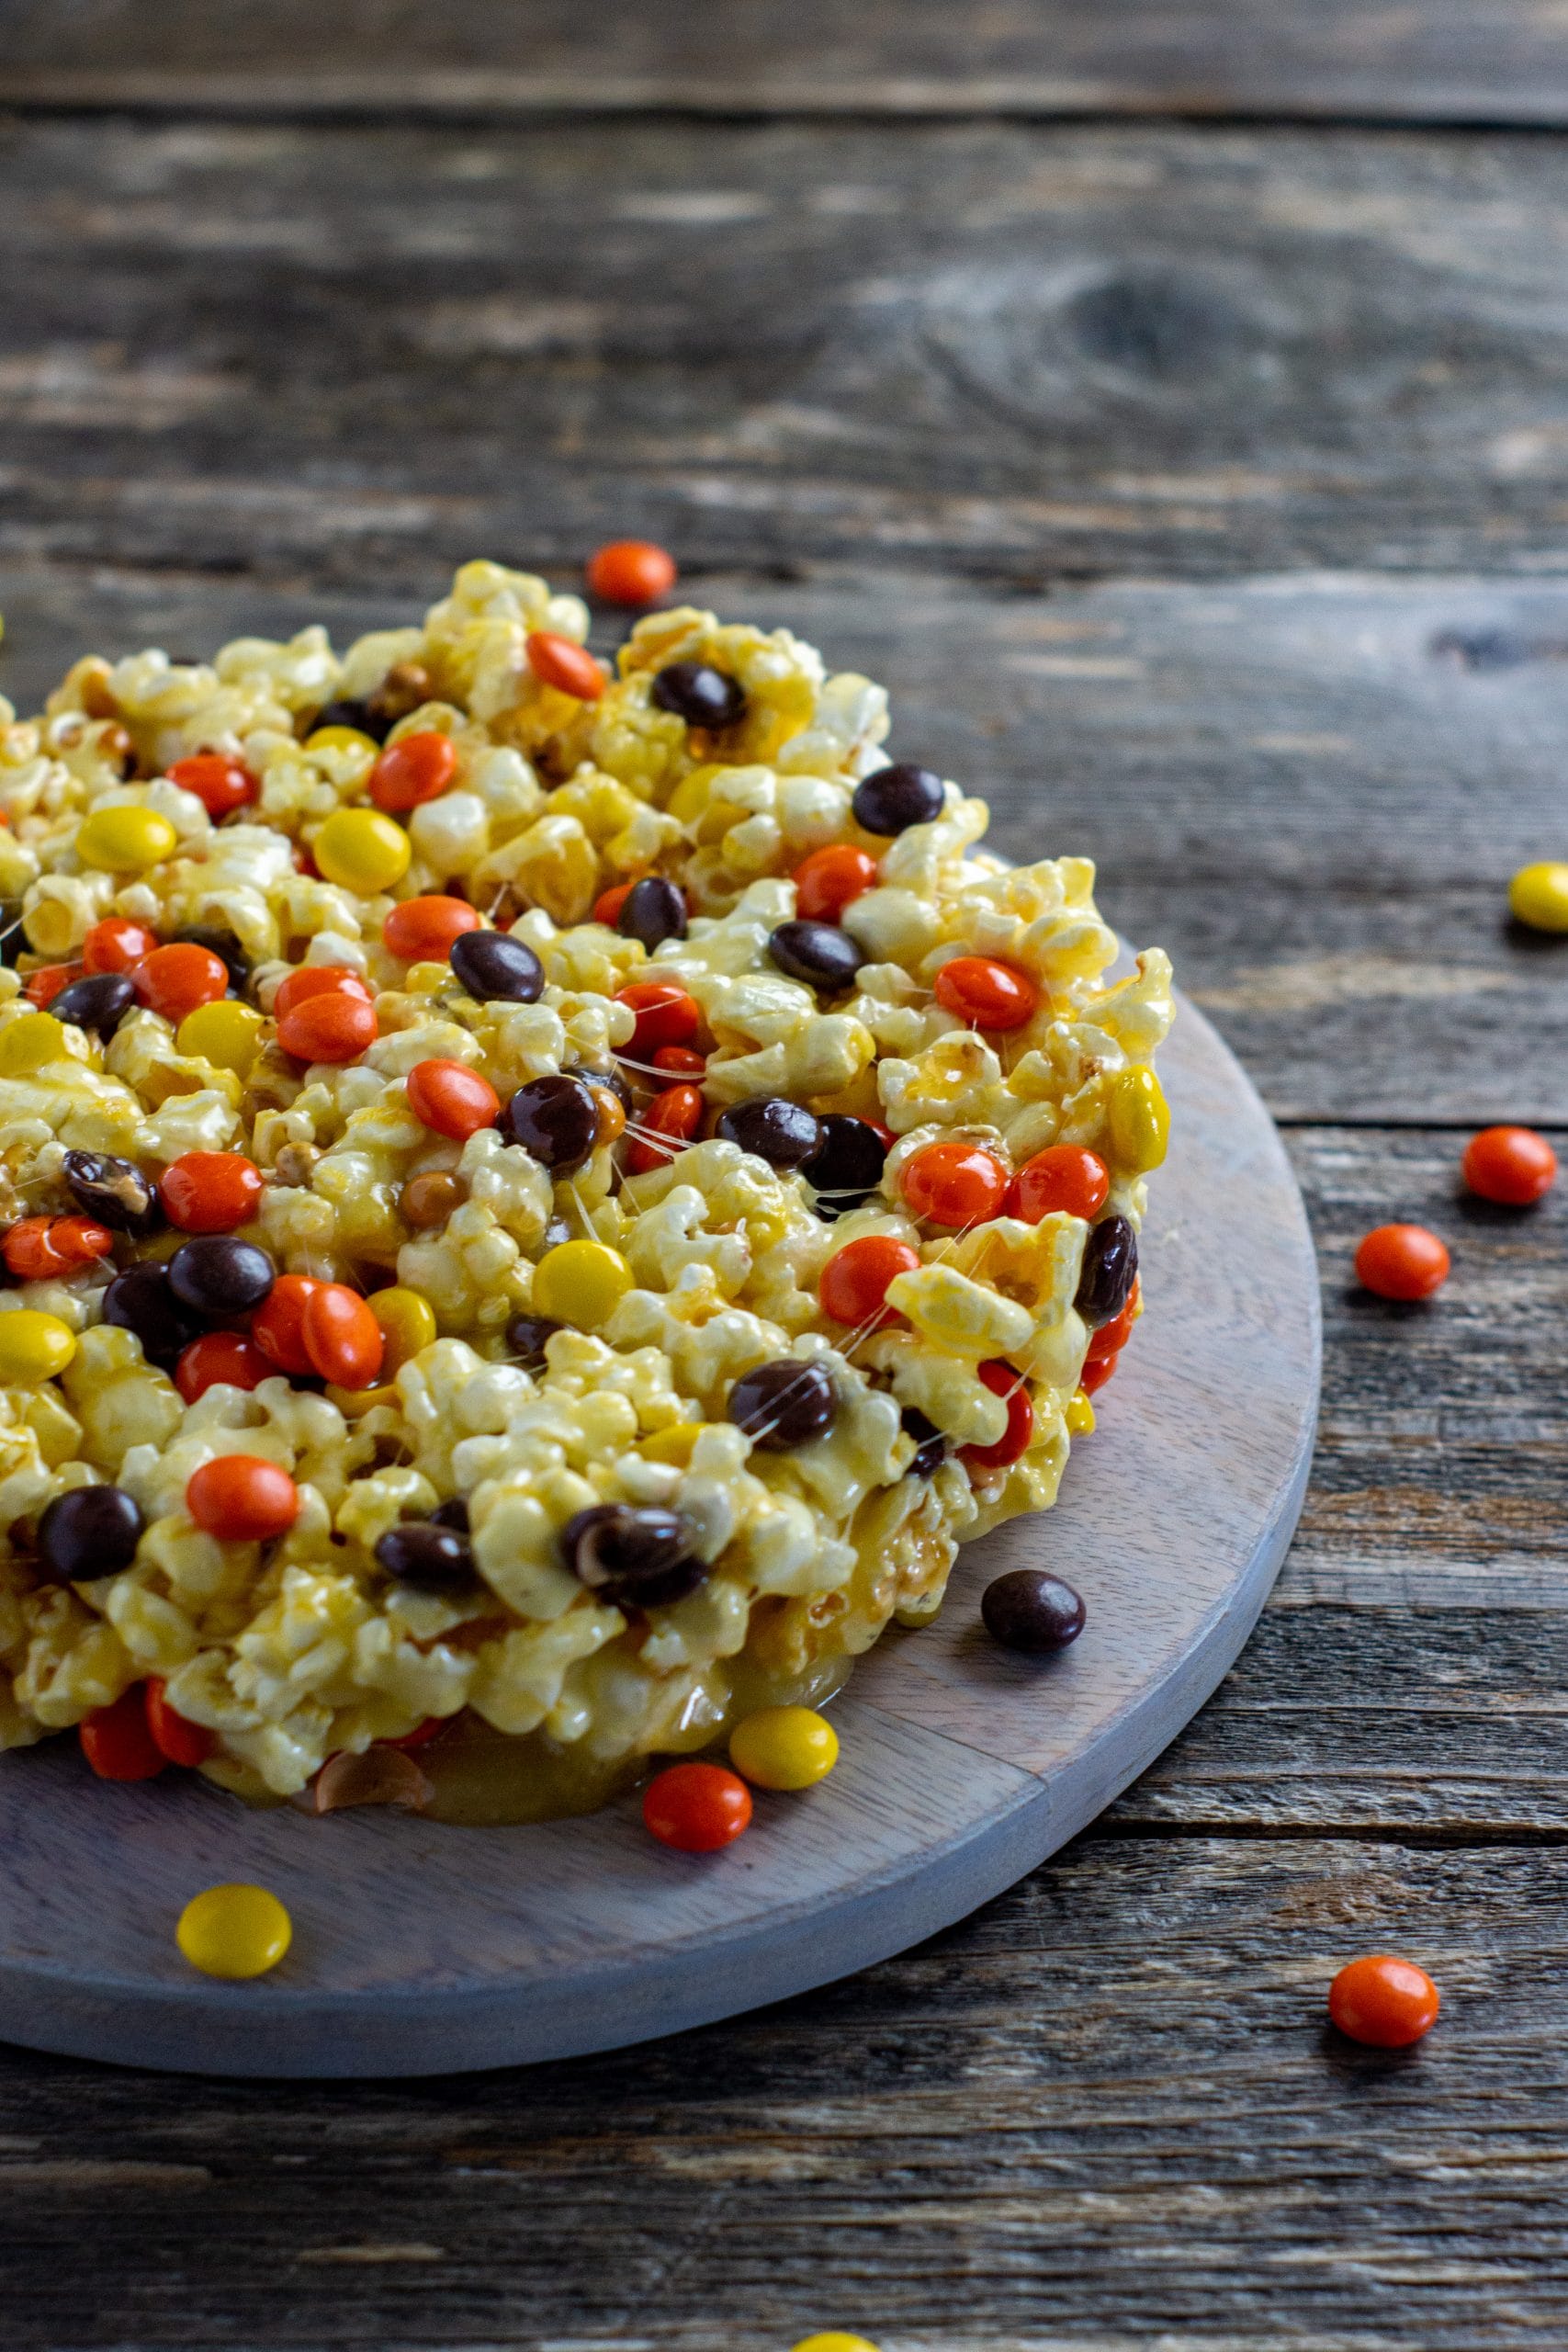 This popcorn cake recipe is a super simple and quick treat that you can make with the kids. The main ingredients of this fun Popcorn Cake are popcorn and candy. It is a wonderful mix of so many flavors. This delicious and super fun Popcorn Cake is a great choice to make and gift to friends and family.